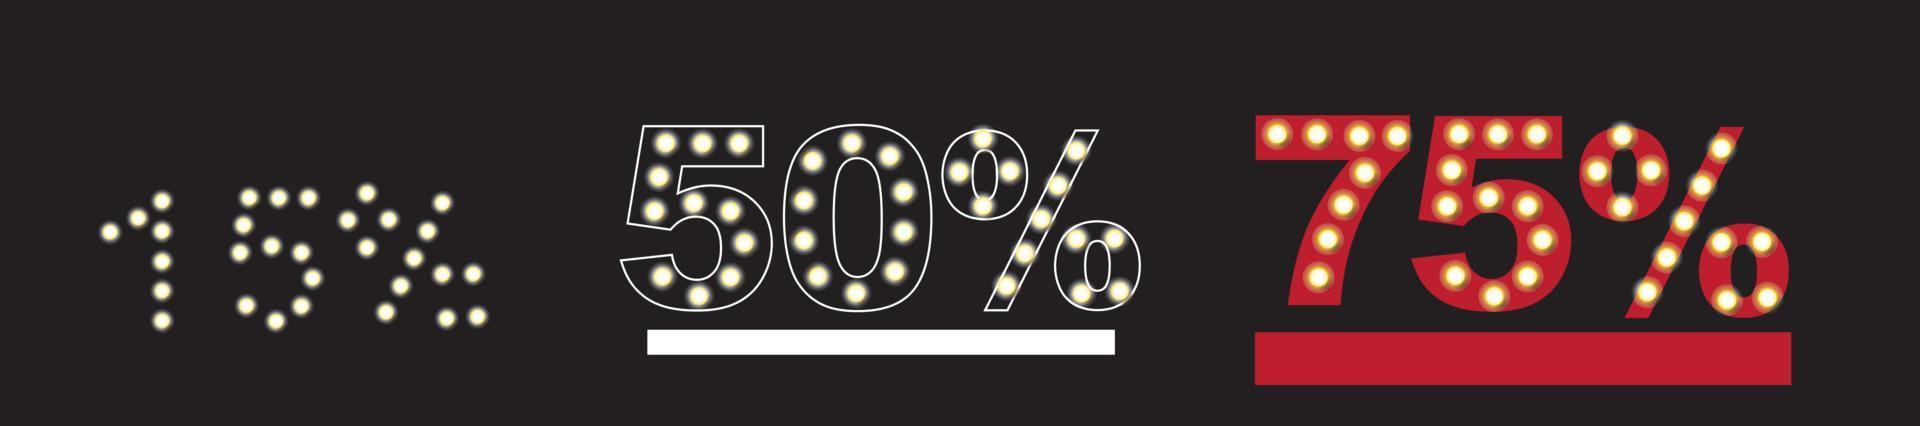 Sale discount icons. Special offer price signs. 15, 50, 75  percent off reduction symbols. Colored elements. Vector